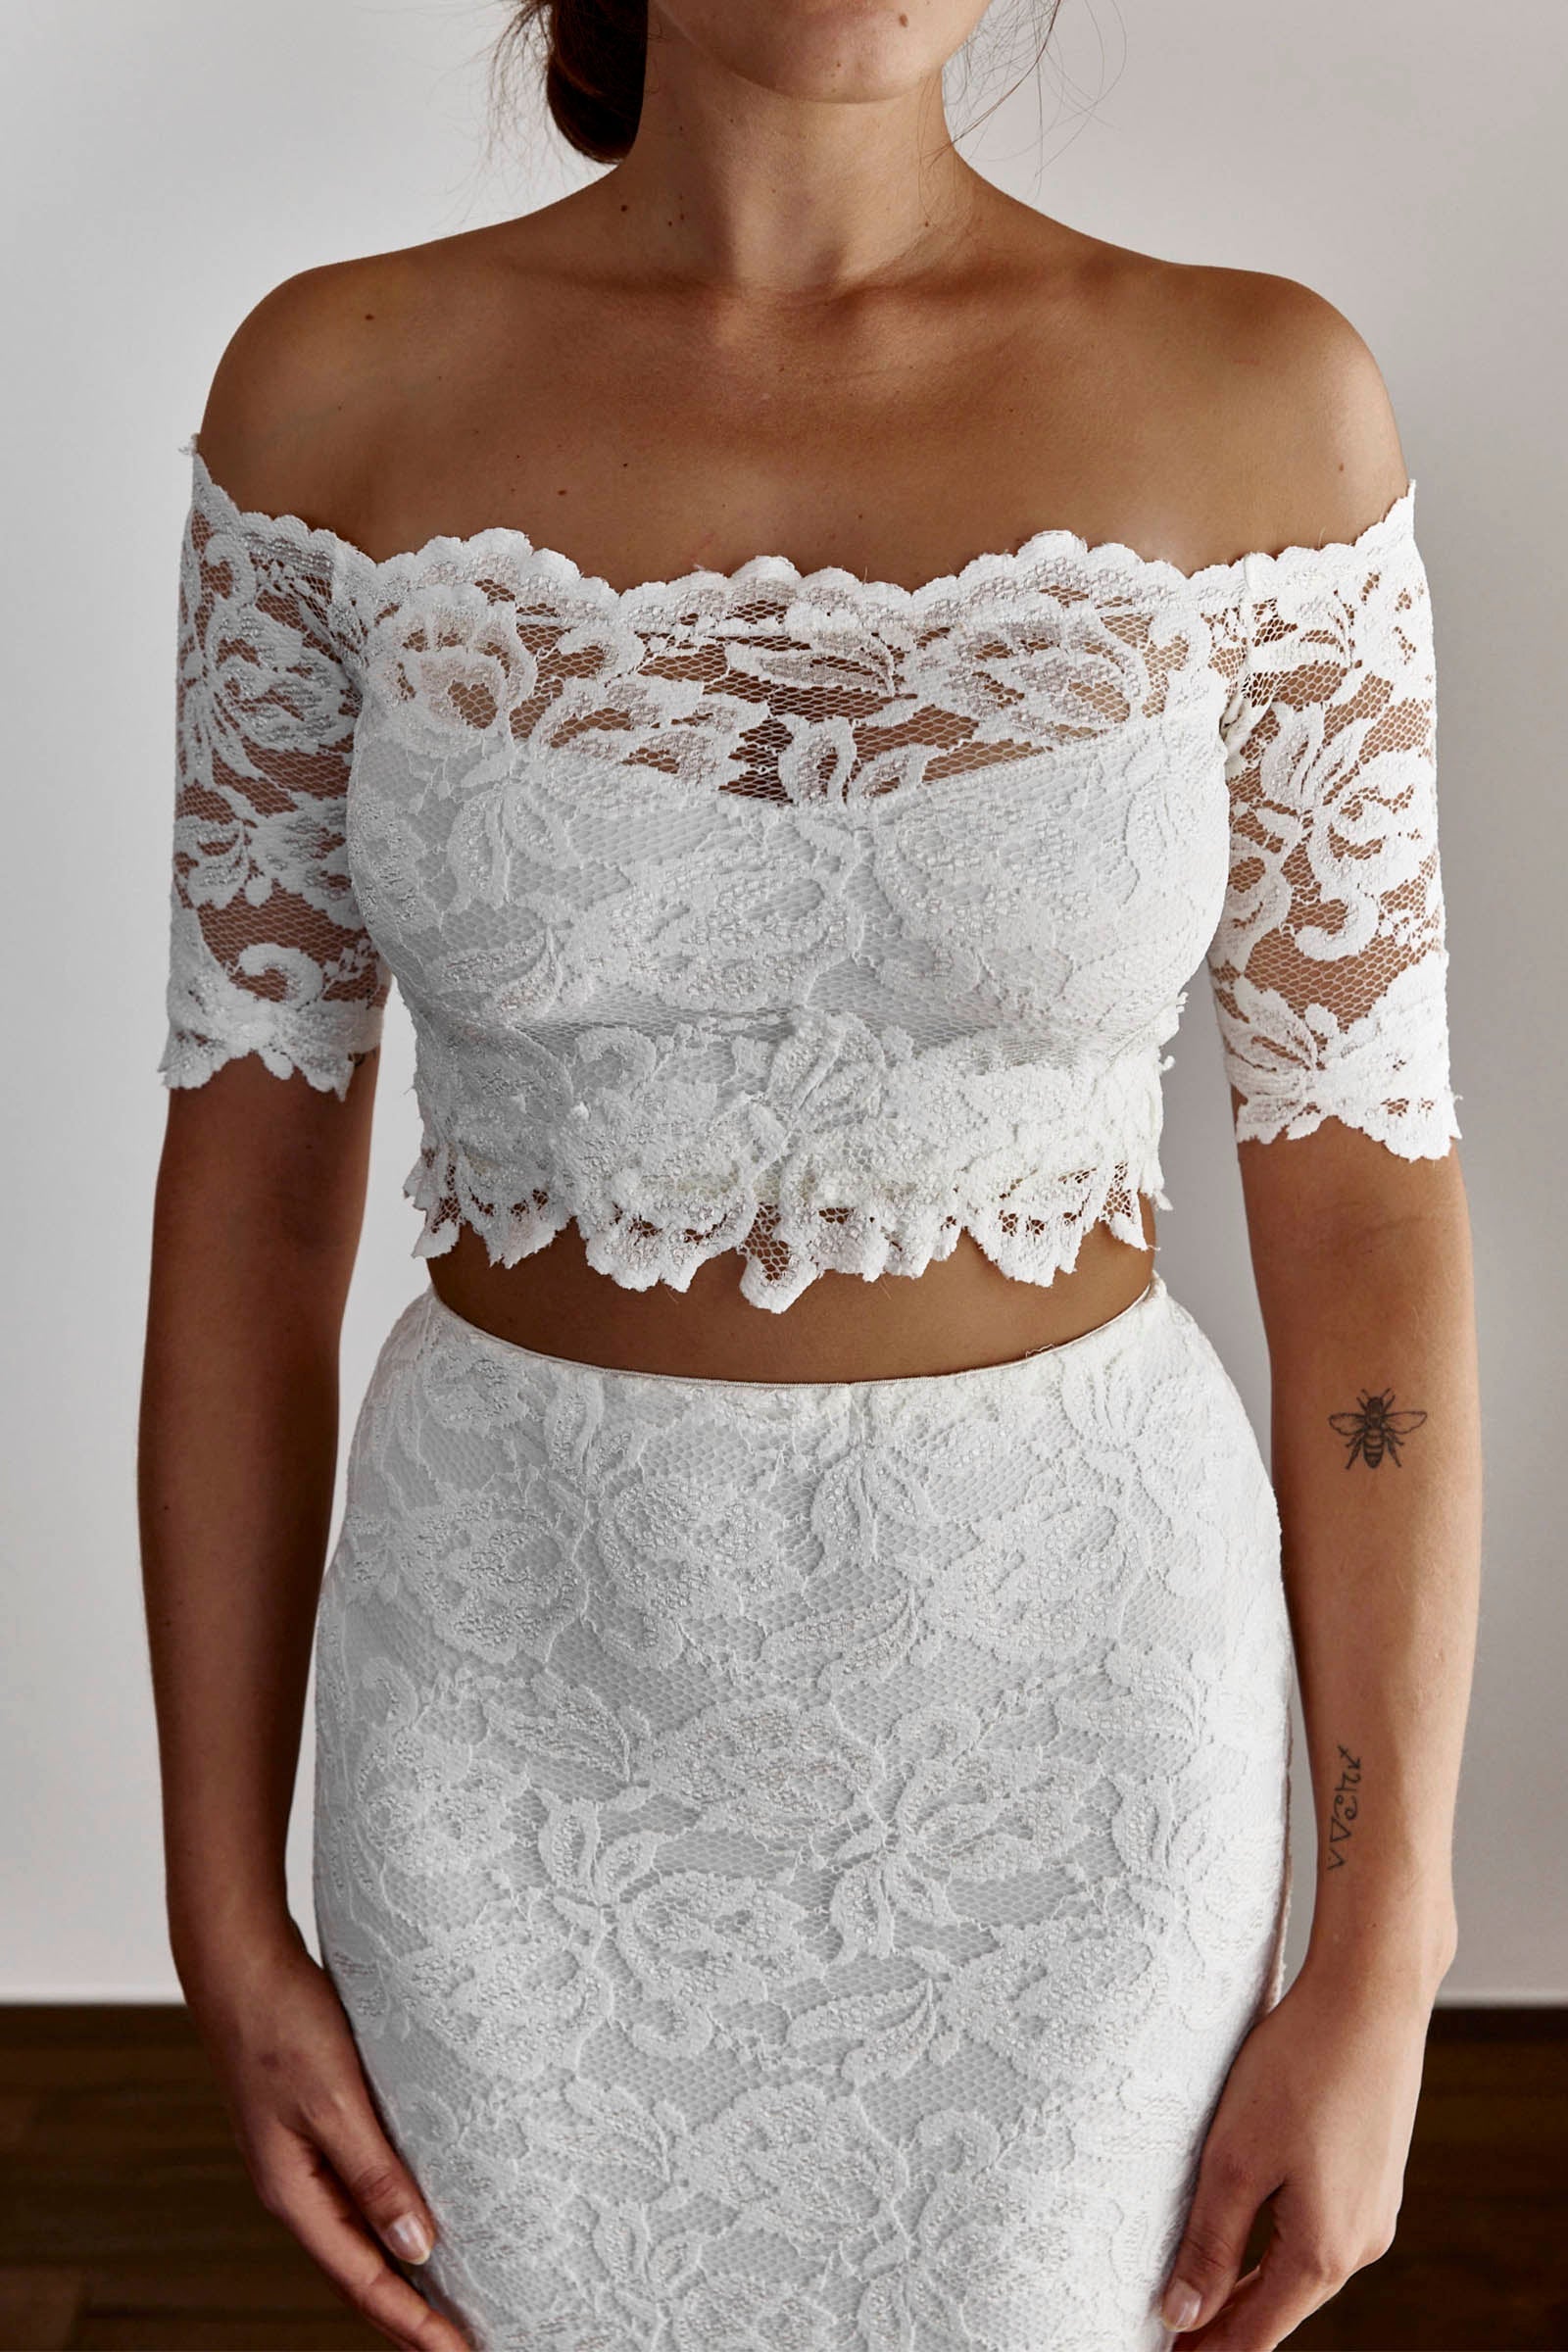 collections/preorders?page=2  Fashion, White lace top, Lace